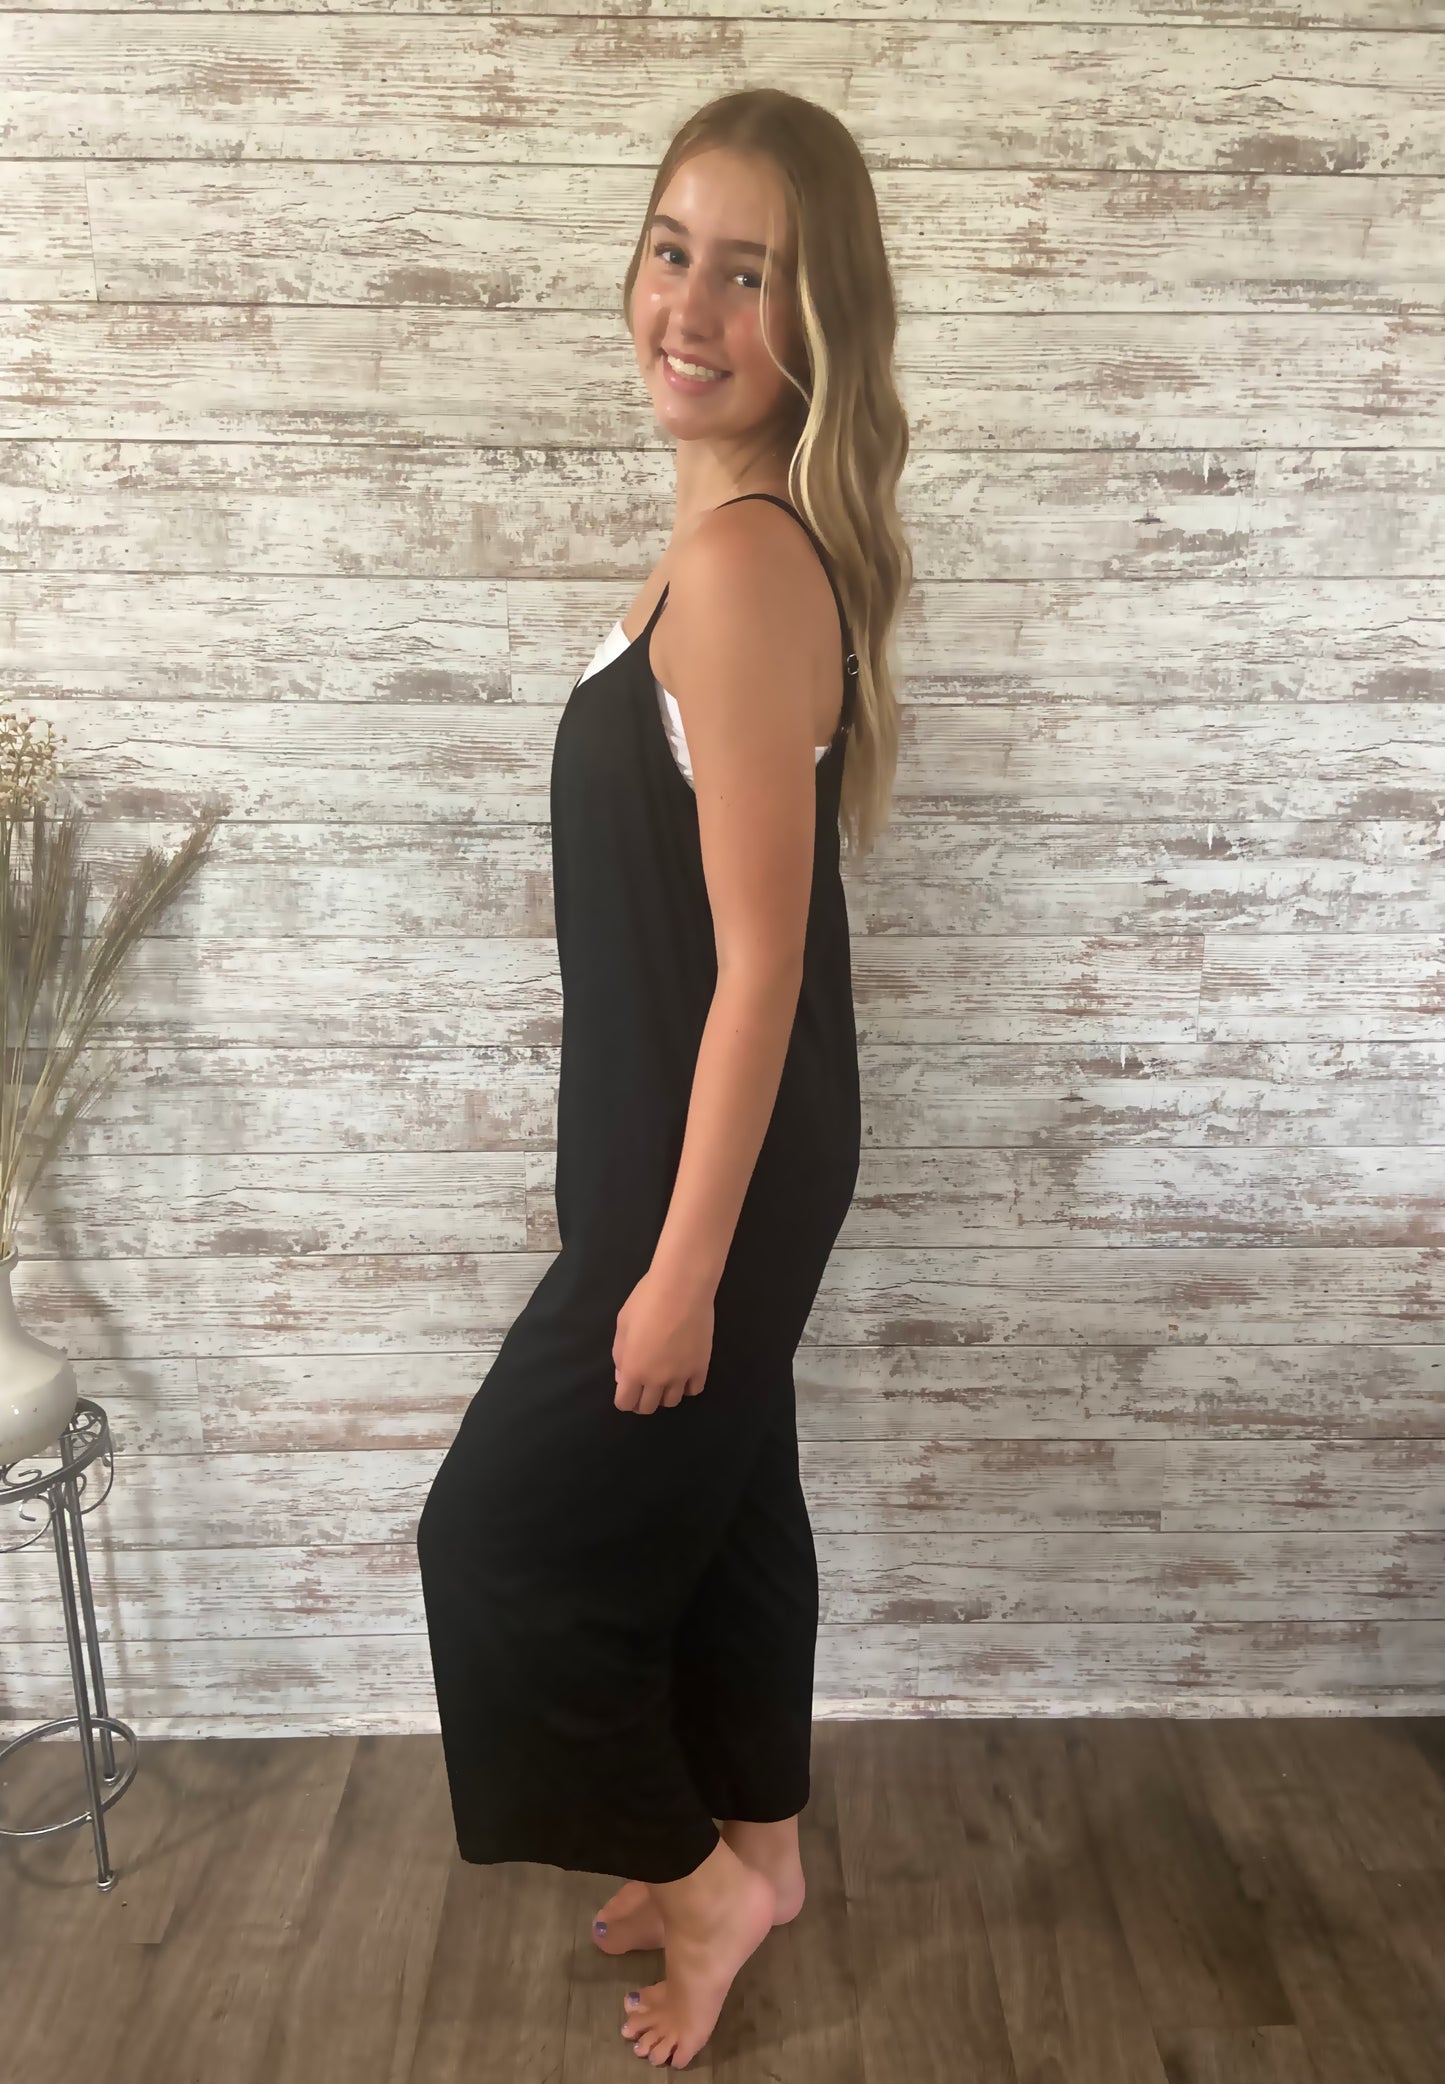 Relaxed Fit Jumpsuit - black